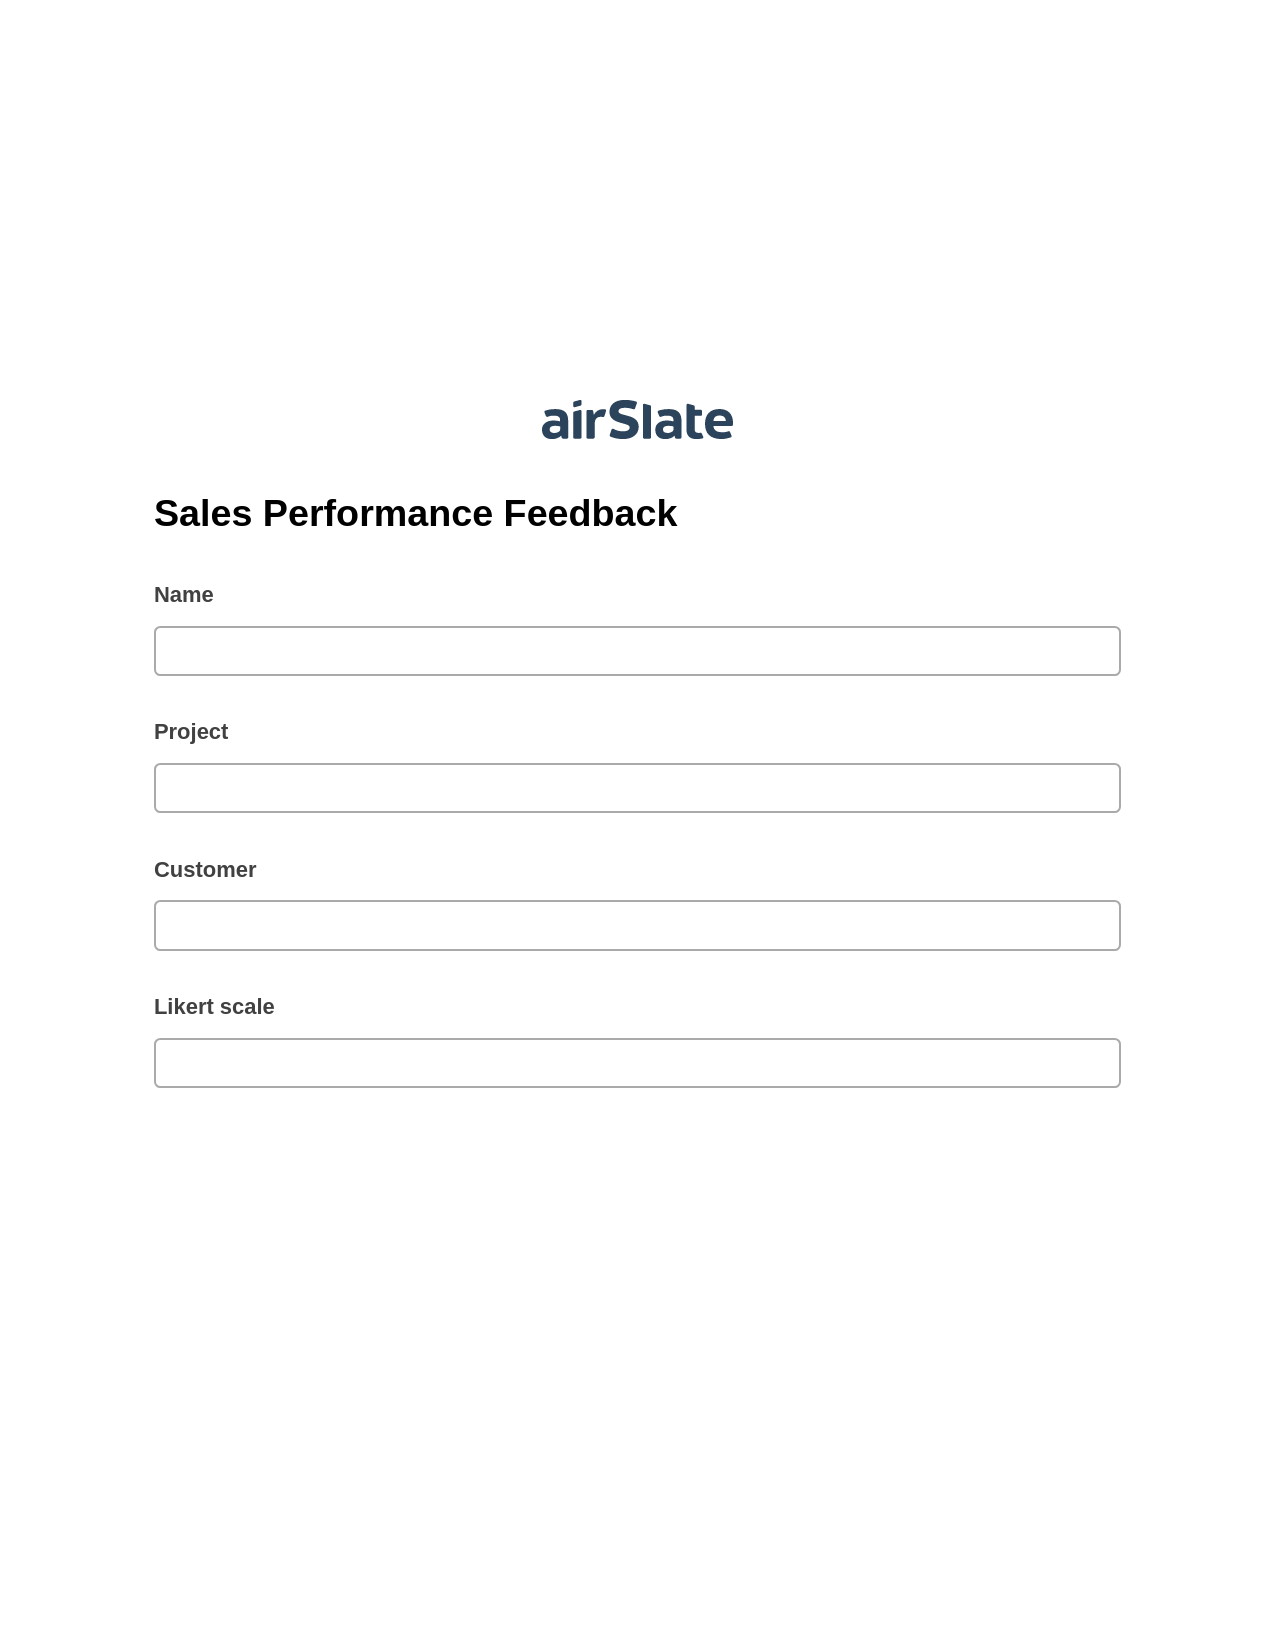 Sales Performance Feedback Pre-fill from CSV File Bot, Unassign Role Bot, Google Drive Bot